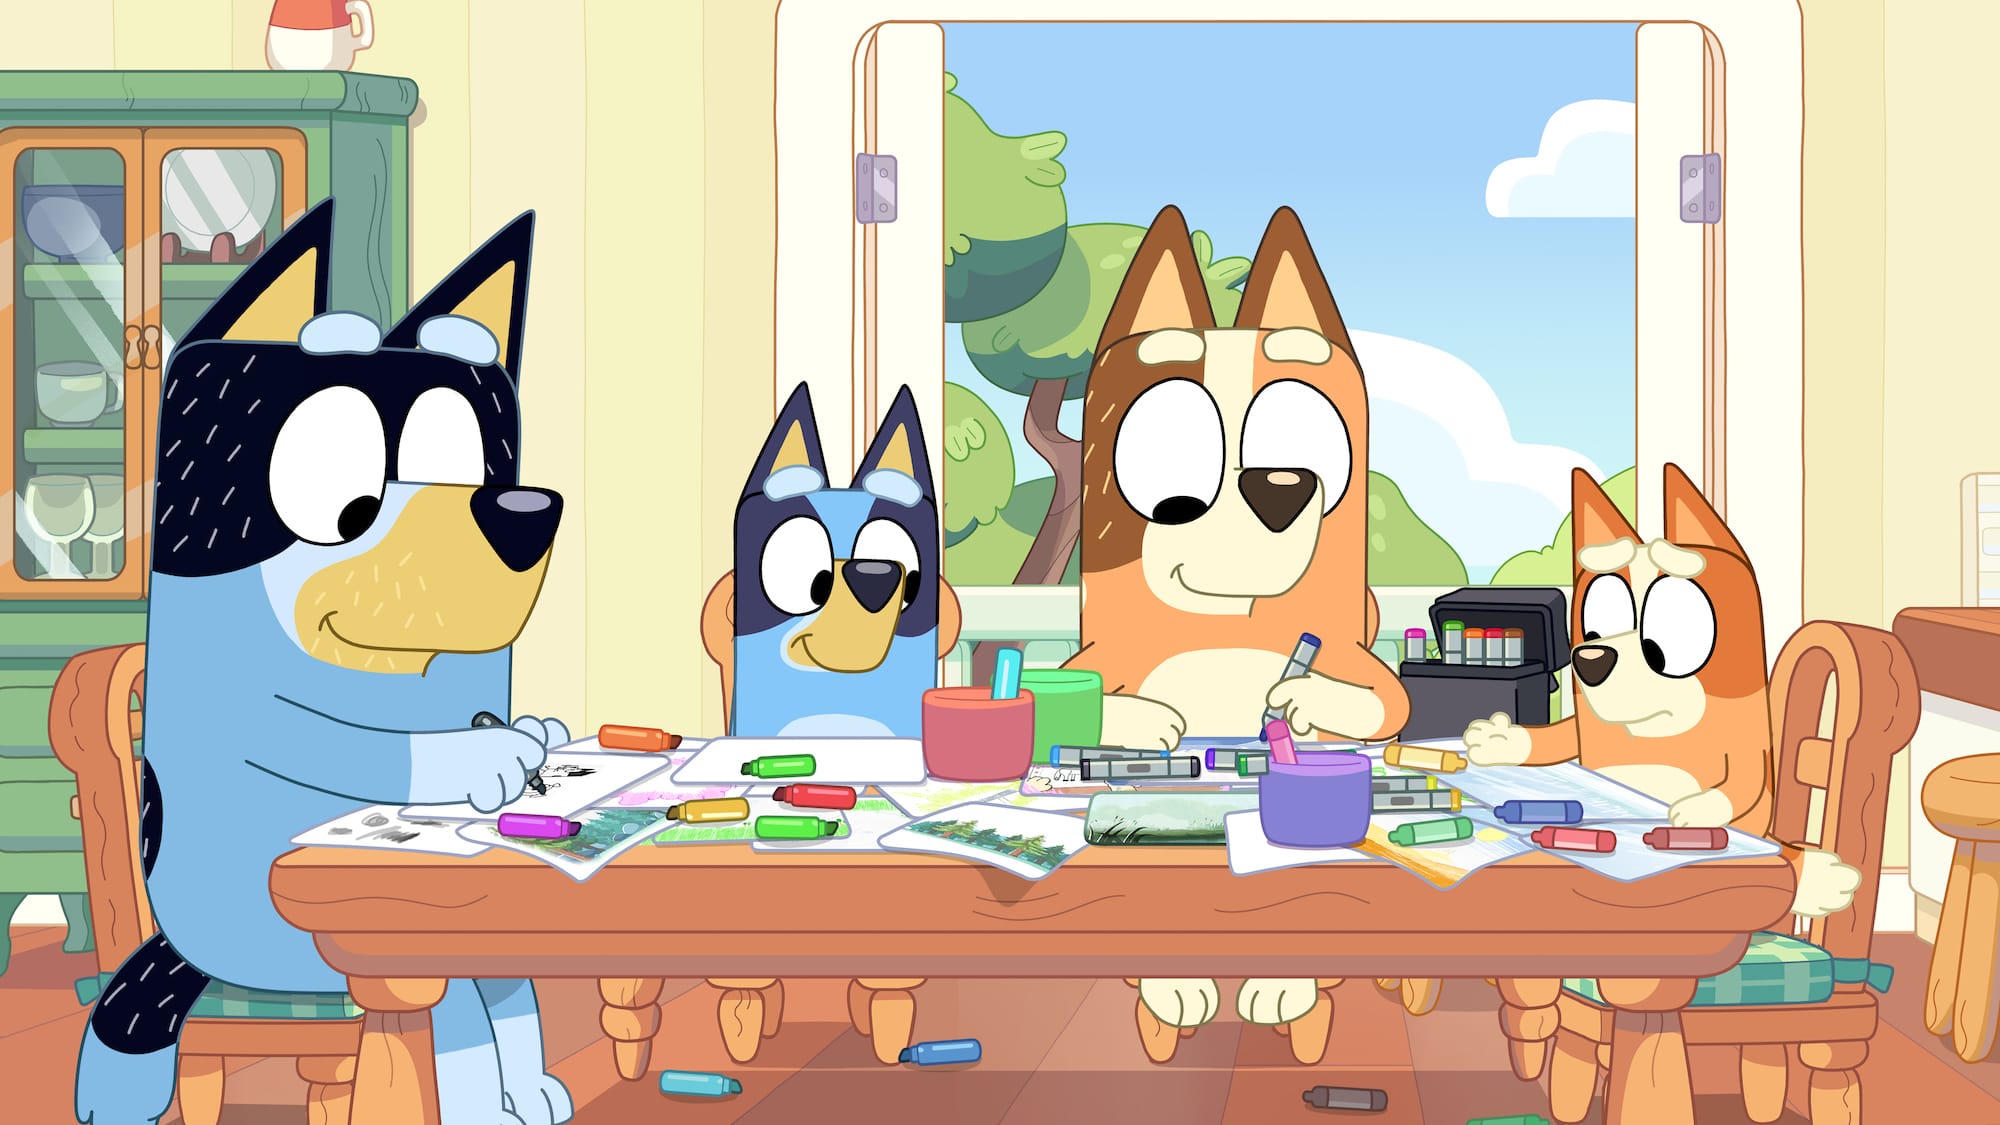 Bandit, Bluey, Chili, and Bingo drawing together at their kitchen table, which is covered in art supplies